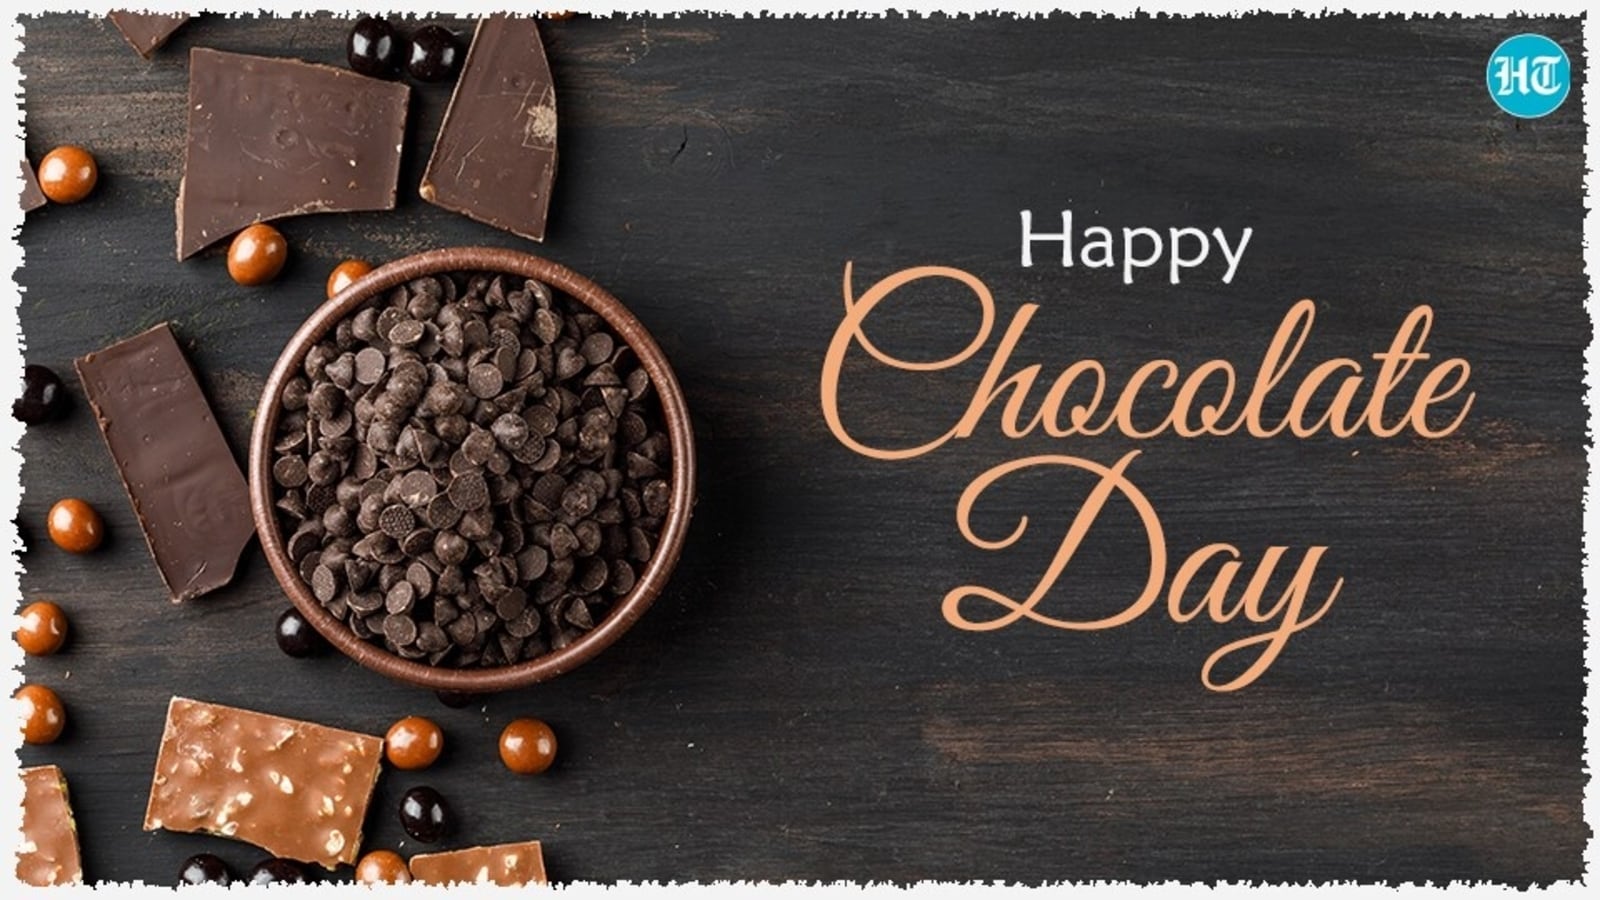 Full 4K Collection of 999+ Amazing Happy Chocolate Day Images